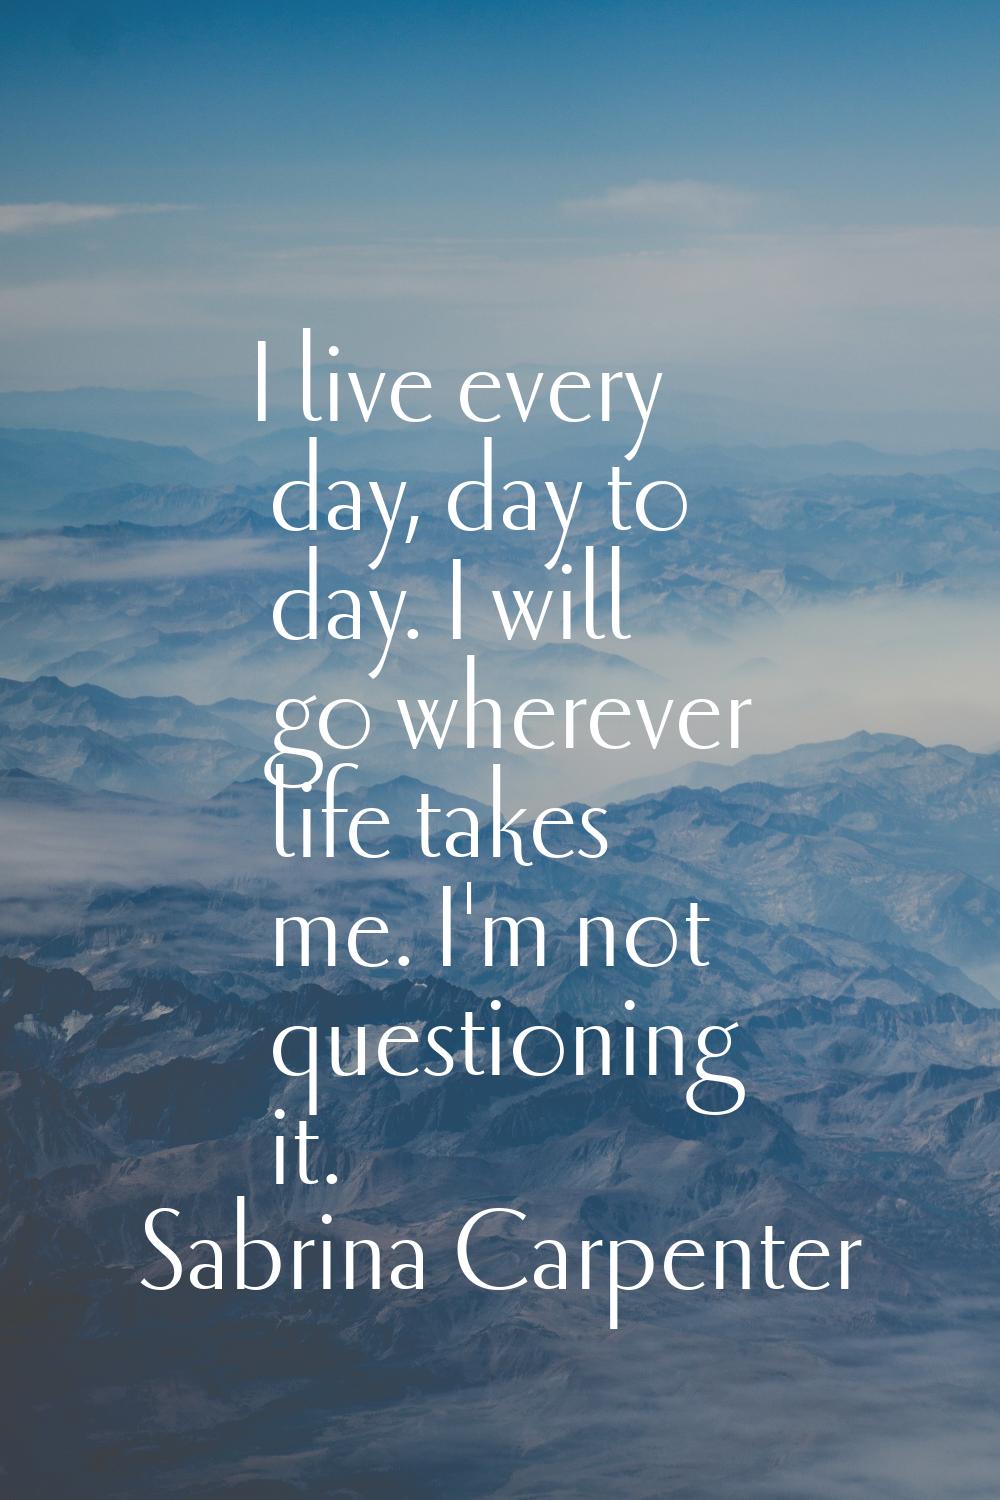 I live every day, day to day. I will go wherever life takes me. I'm not questioning it.